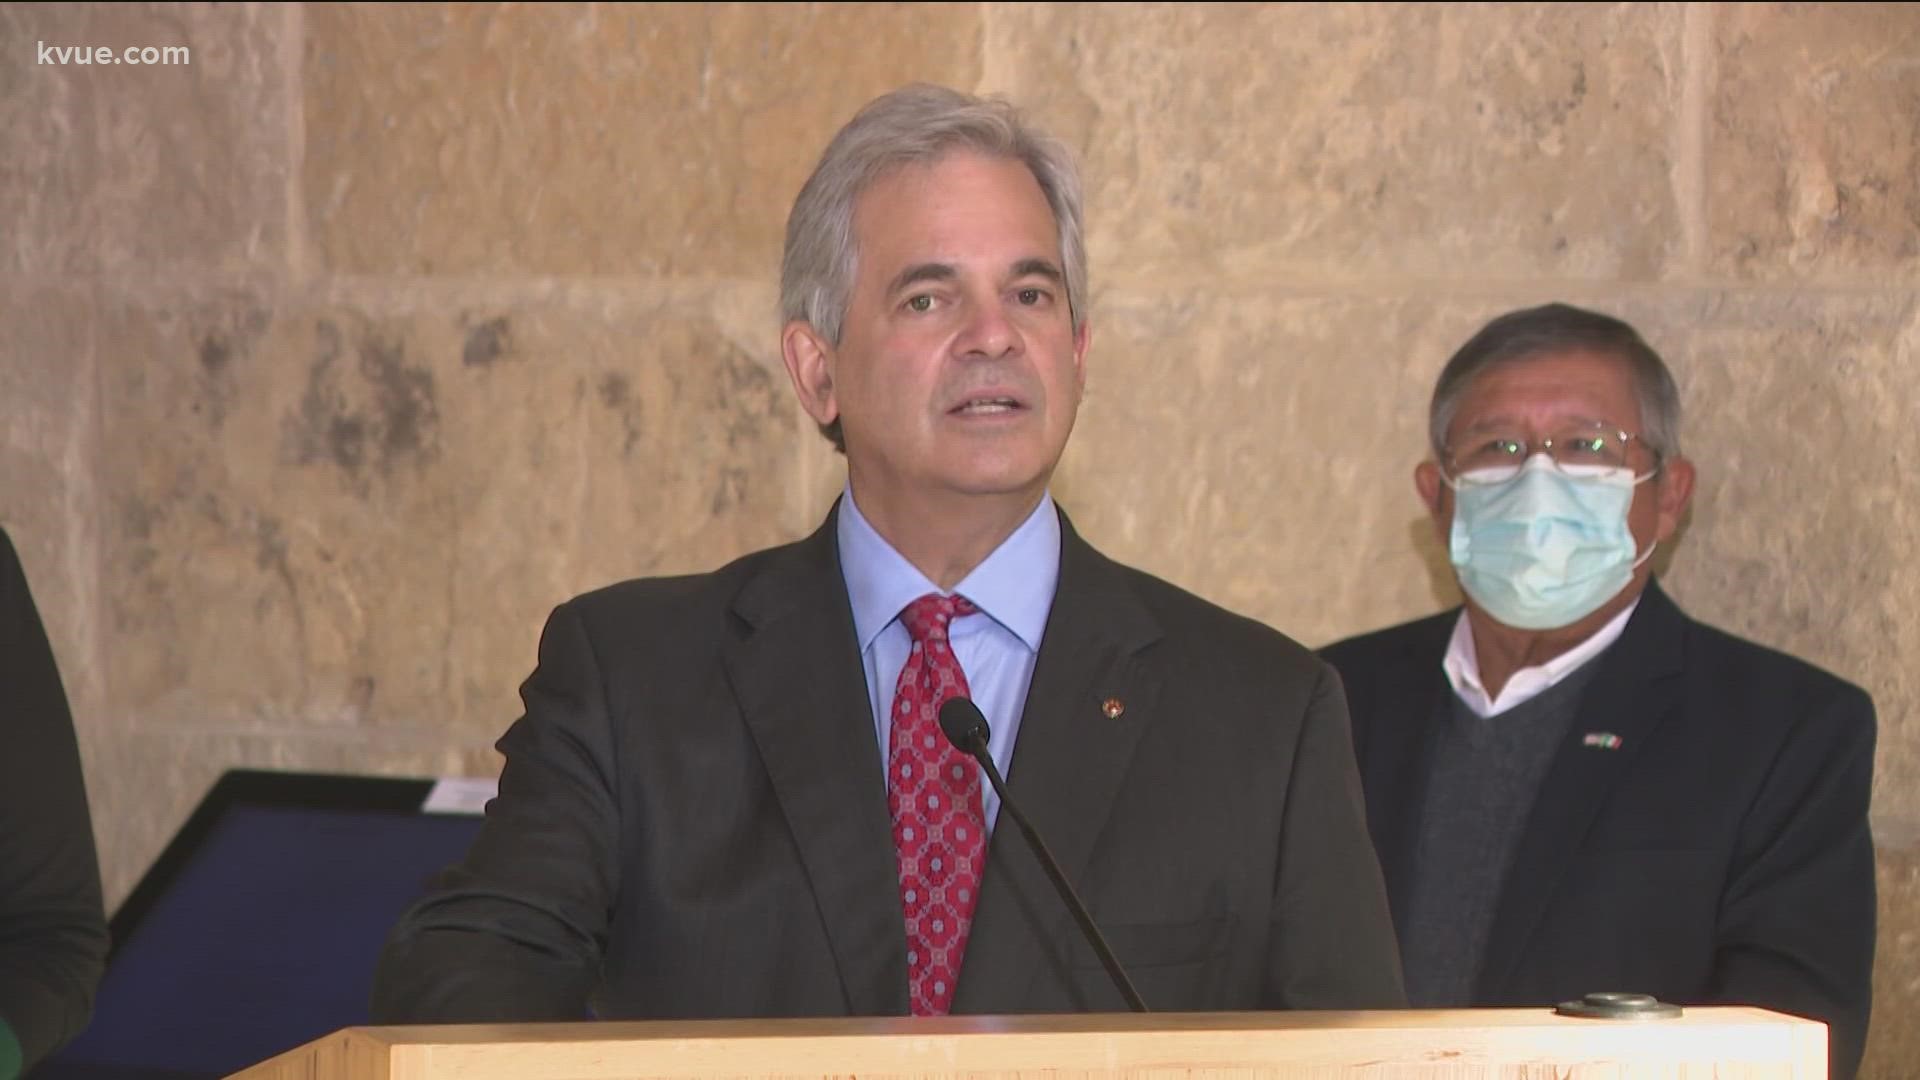 We spoke with Mayor Steve Adler about what the city council is doing to ease rising rent and home prices.